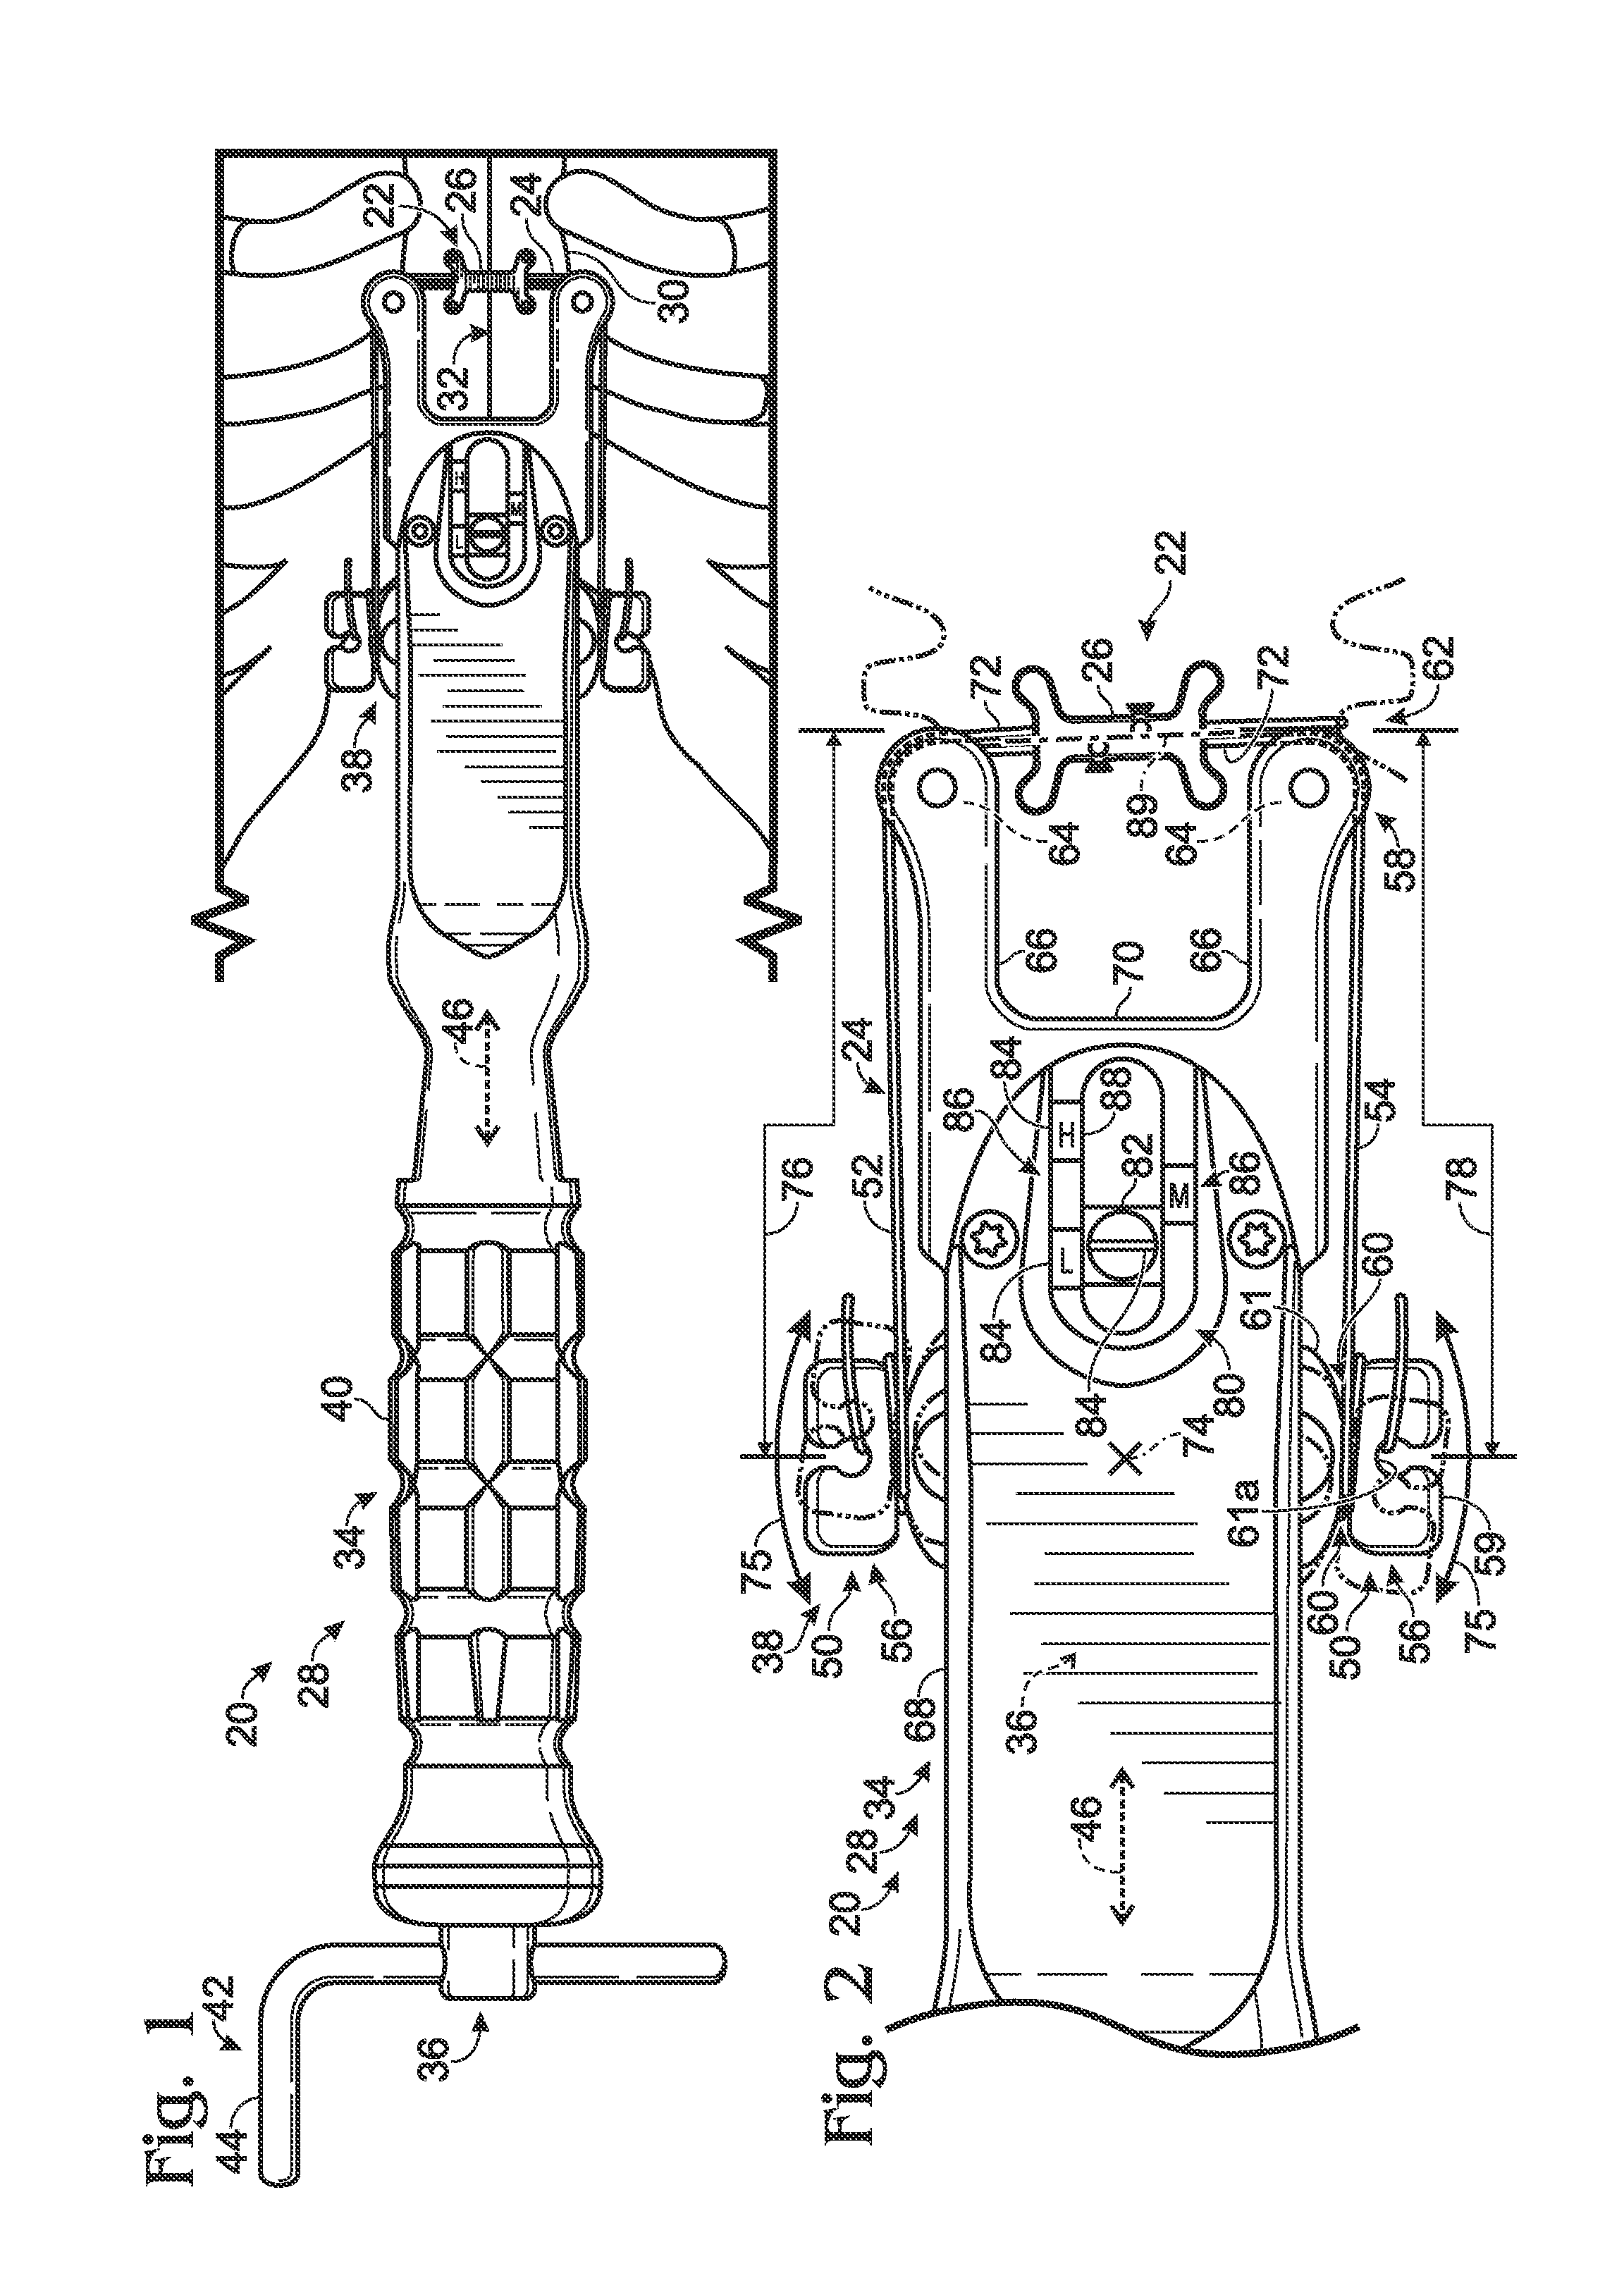 System for tensioning a surgical wire